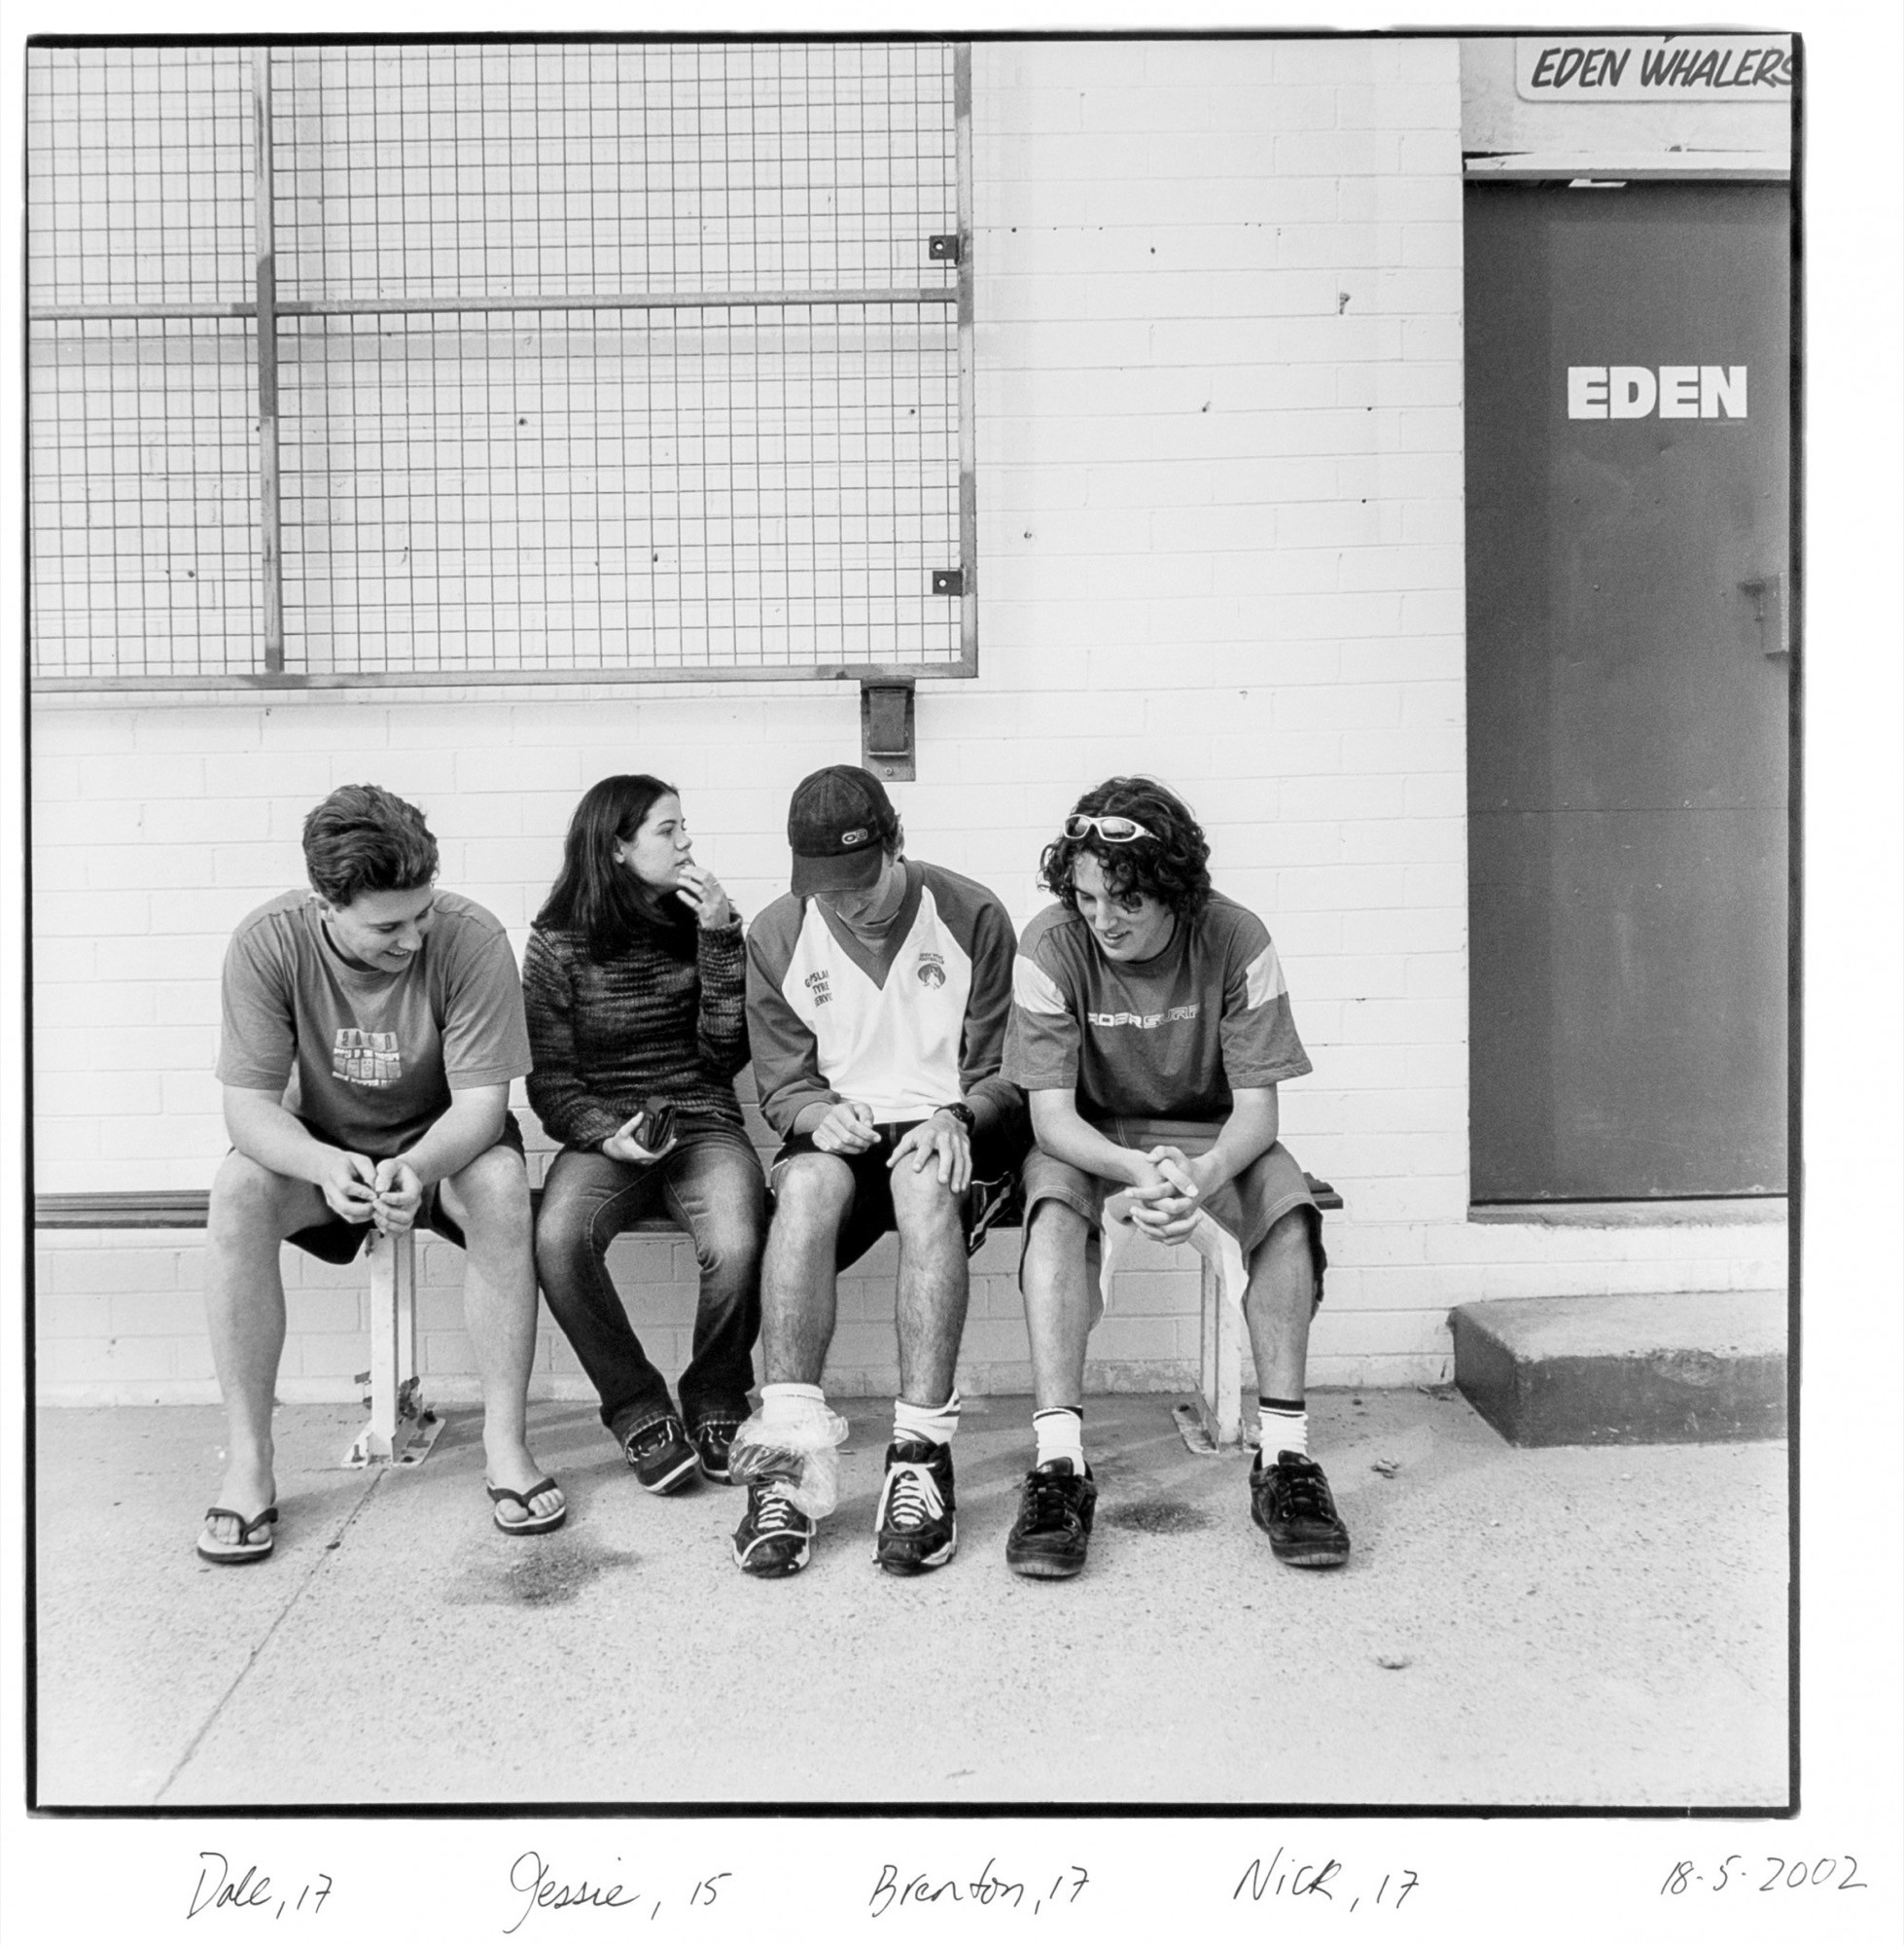 Ruth Maddison, <em>Footy oval</em>, from the series <em>Now a river went out of Eden</em>, 2002, silver gelatin vintage print, 2002, 52.5 x 42.5 cm (image size). Courtesy of the artist and the Centre for Contemporary Photography.